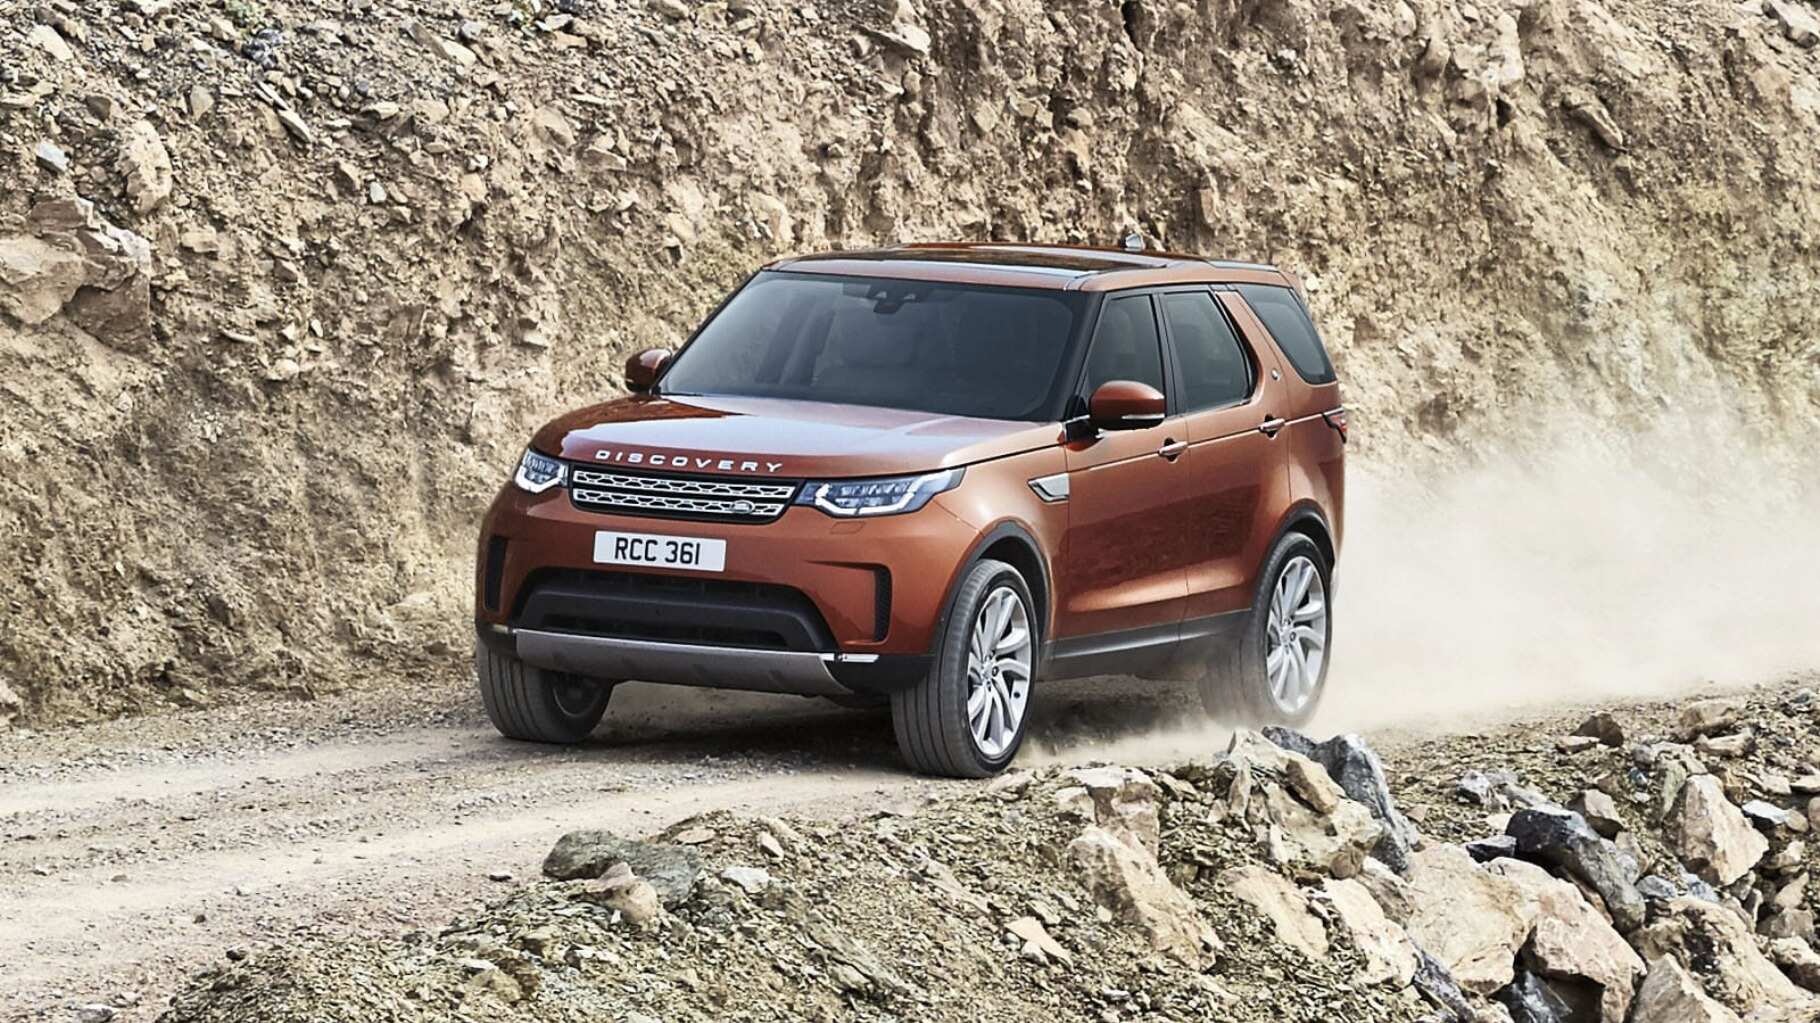 Land Rover Discovery Off-road Driving All-terrain vehicle